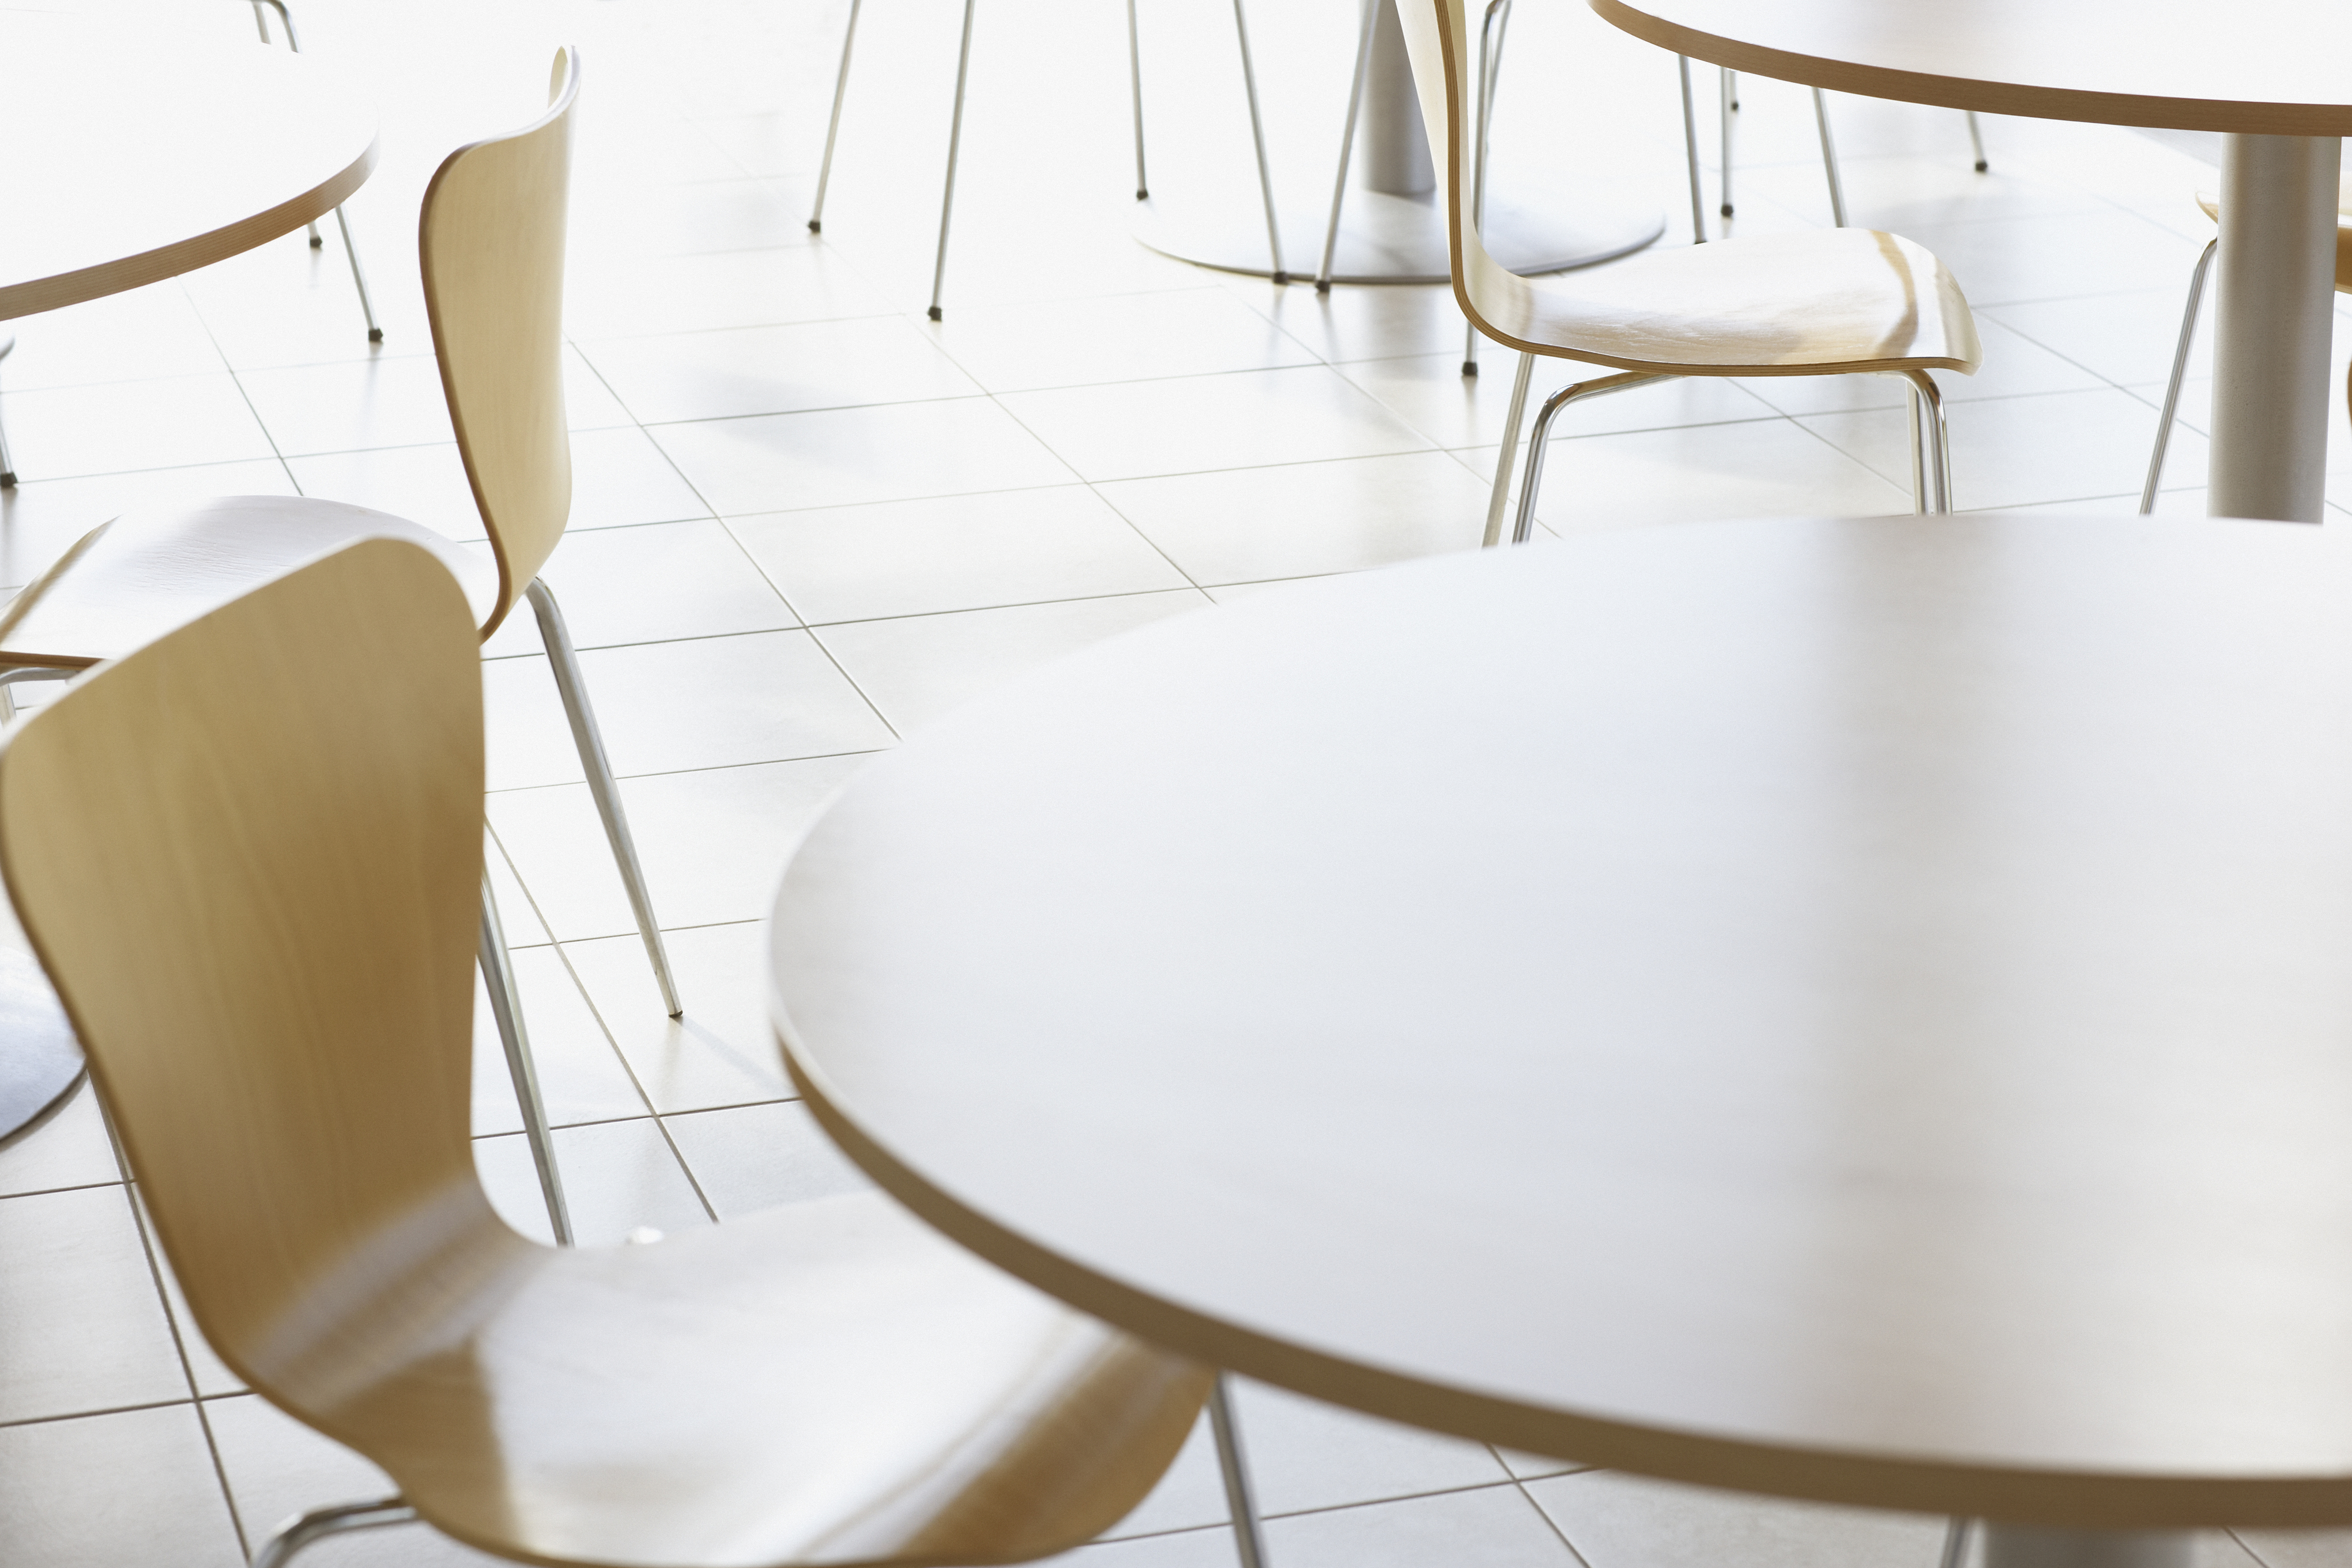 tables in an office canteen